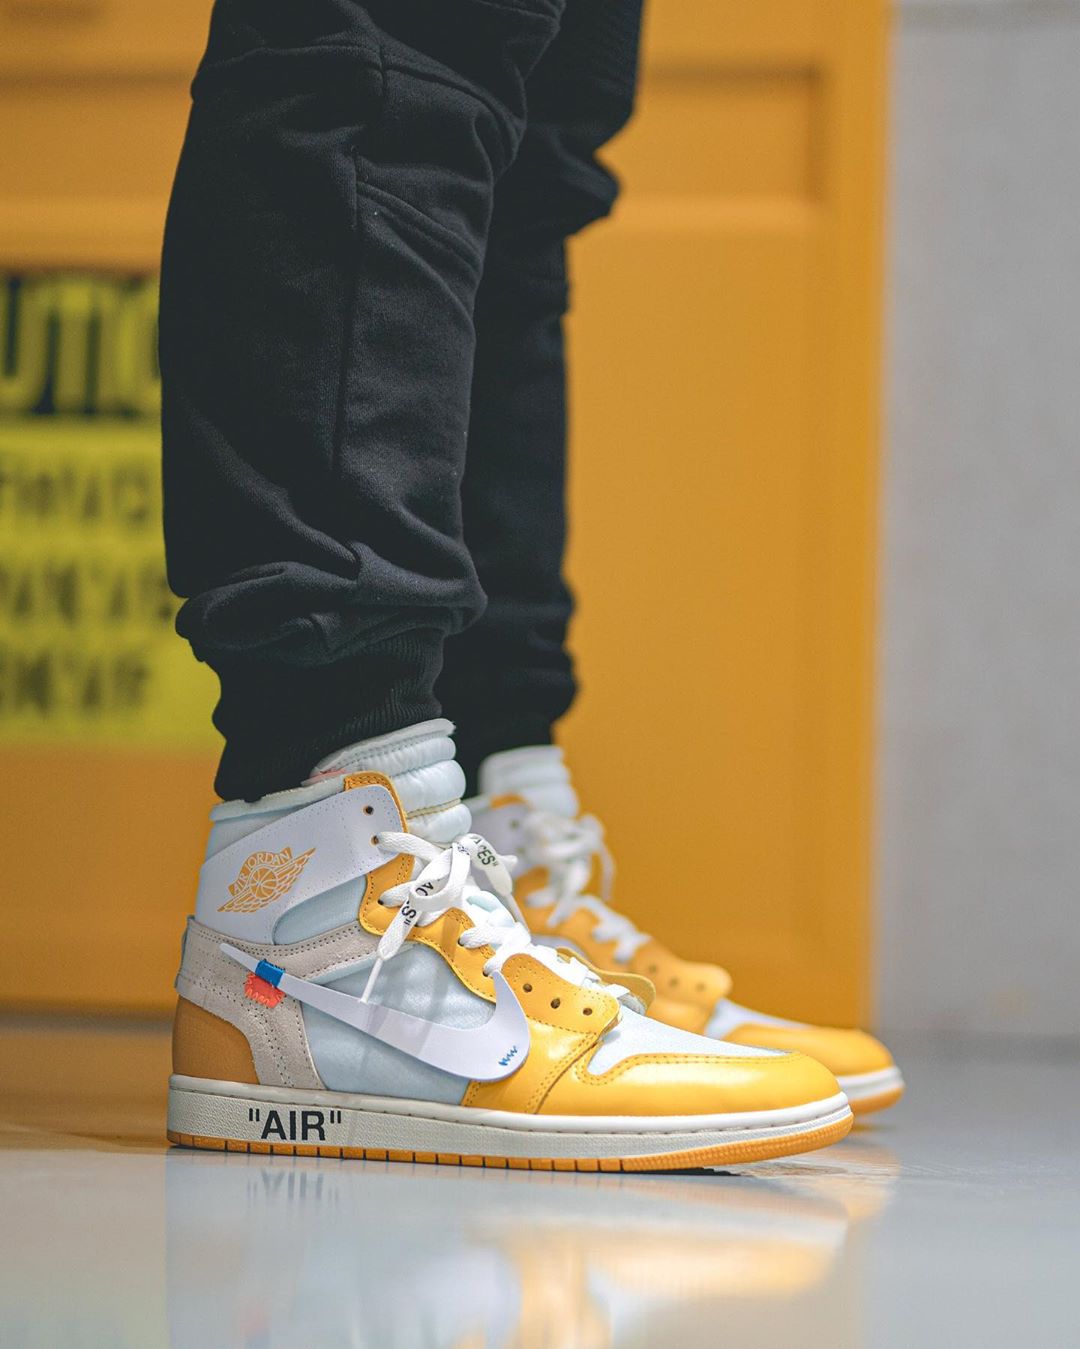 Lære udenad Parasit Duplikere Check Out the Off-White x Air Jordan 1 "Canary Yellow" Here | Grailify